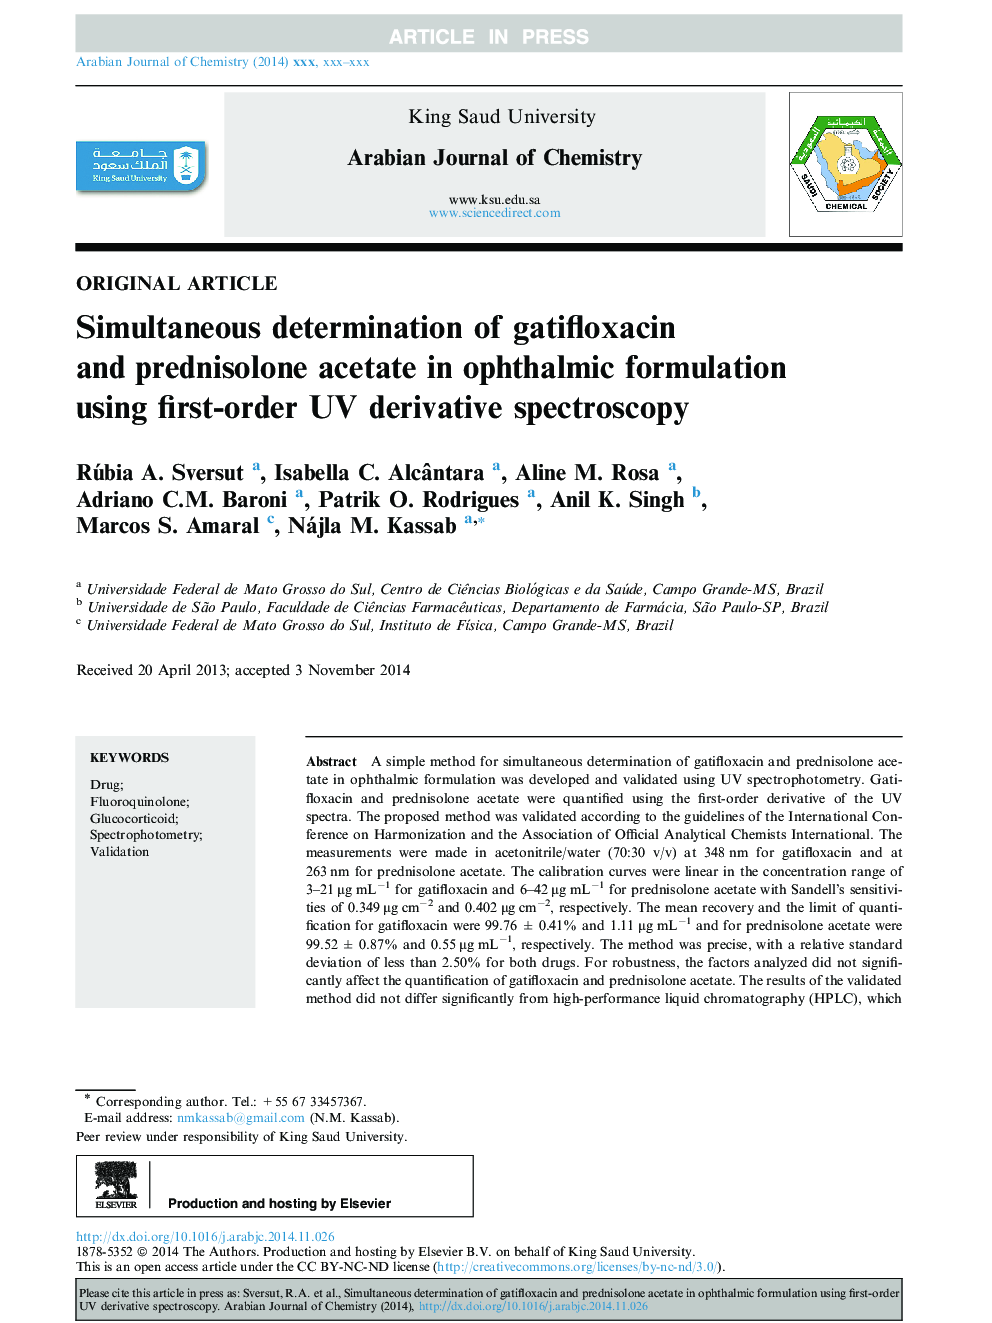 Simultaneous determination of gatifloxacin and prednisolone acetate in ophthalmic formulation using first-order UV derivative spectroscopy